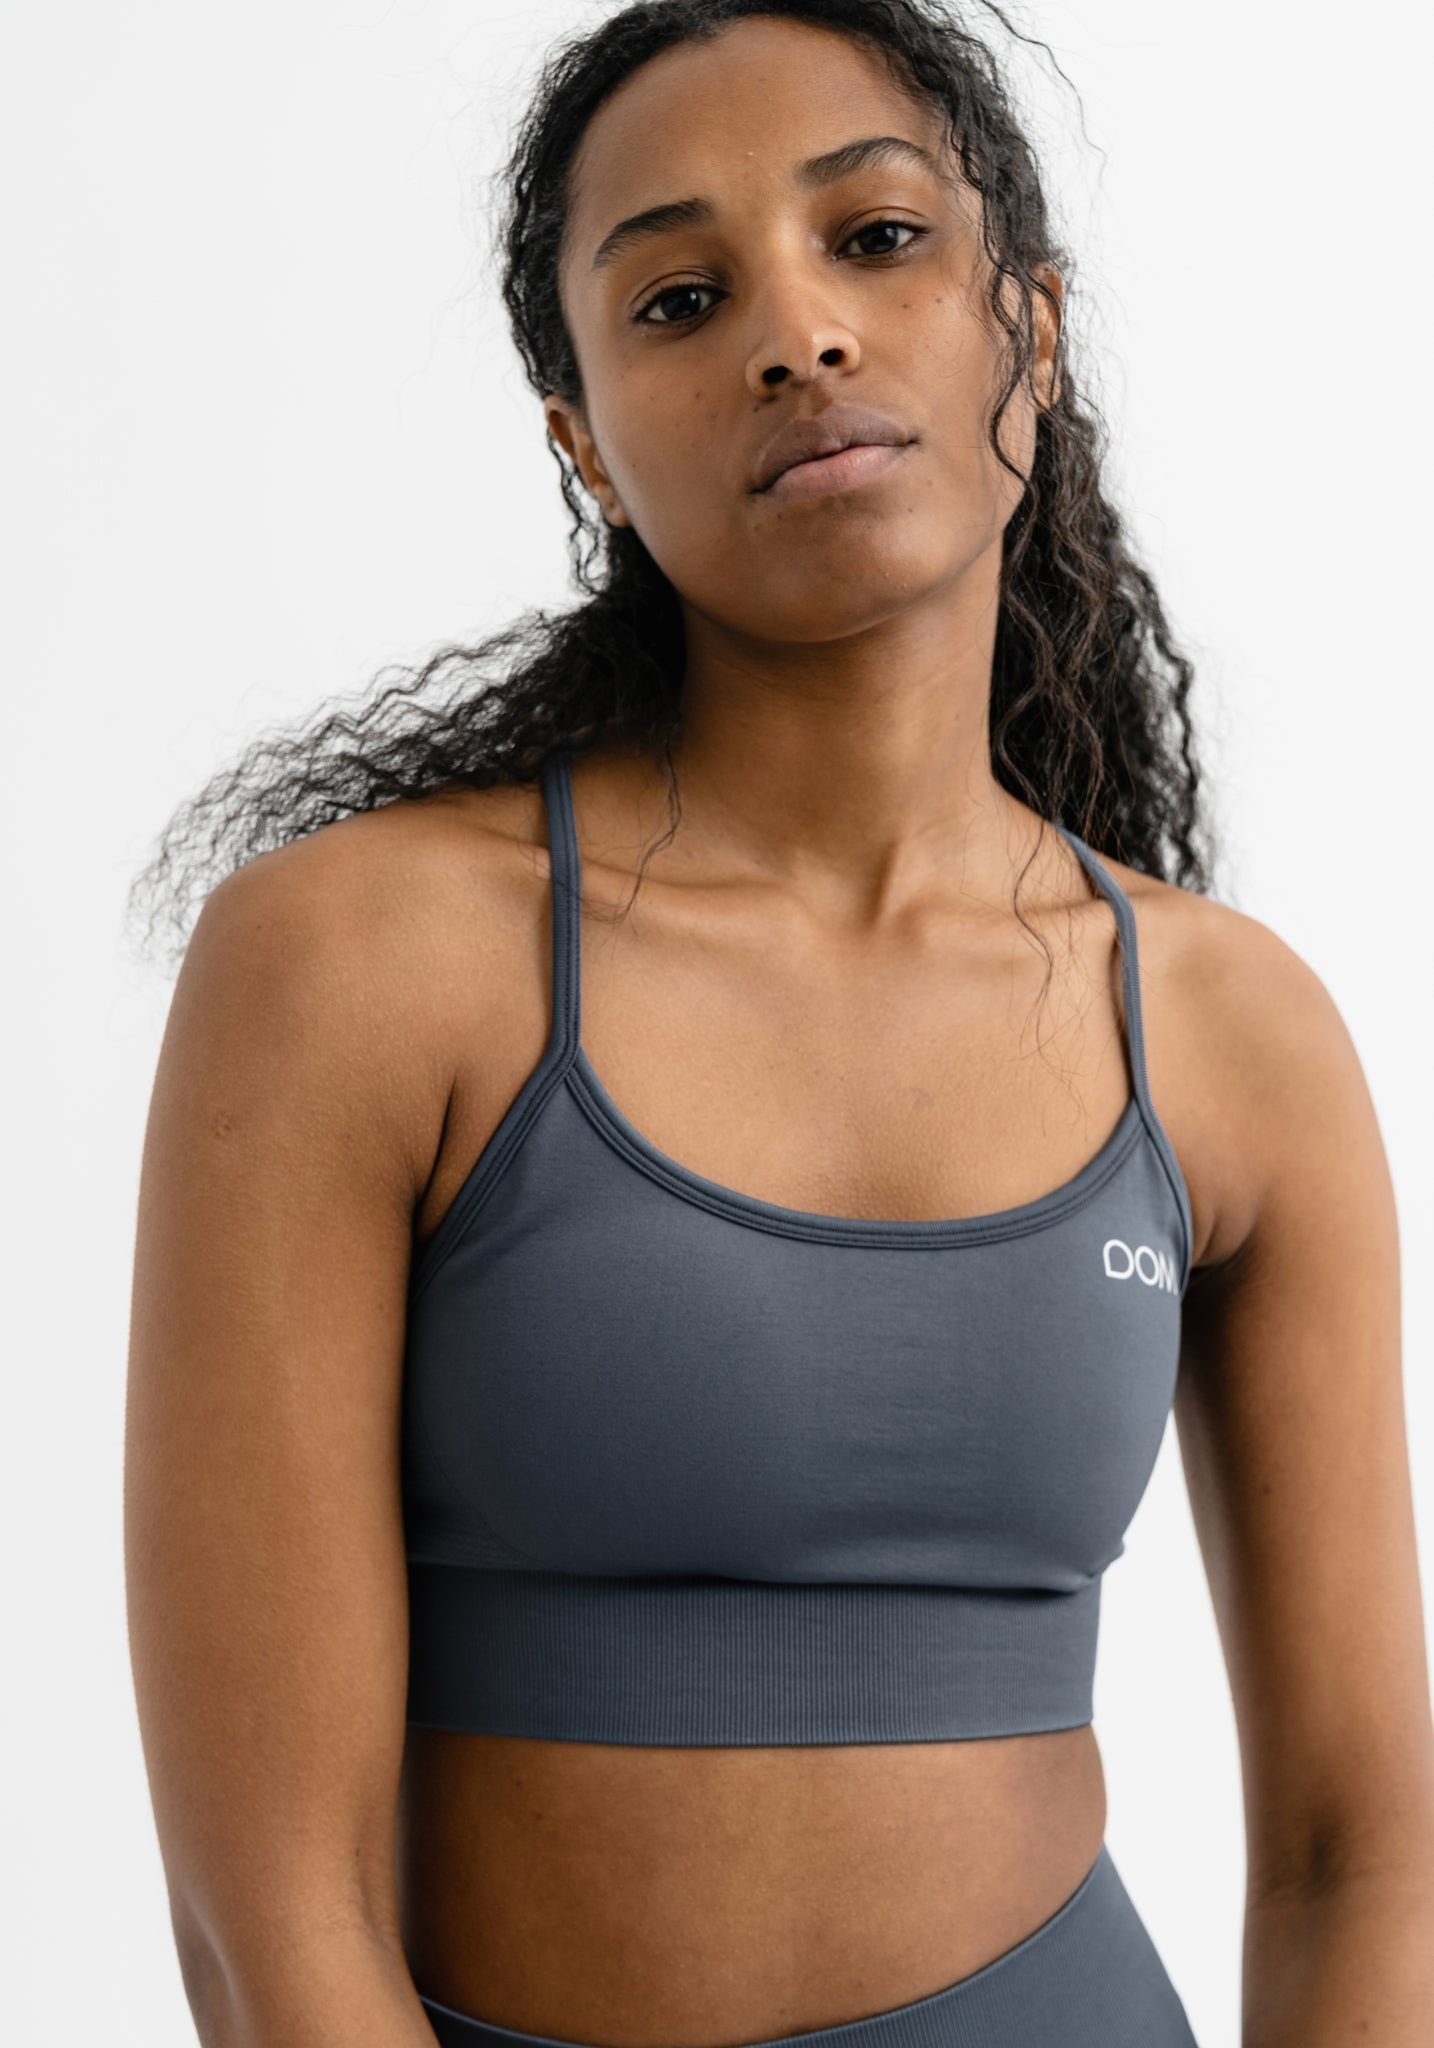 Sports bras from Drop of Mindfulness – Drop Of Mindfulness